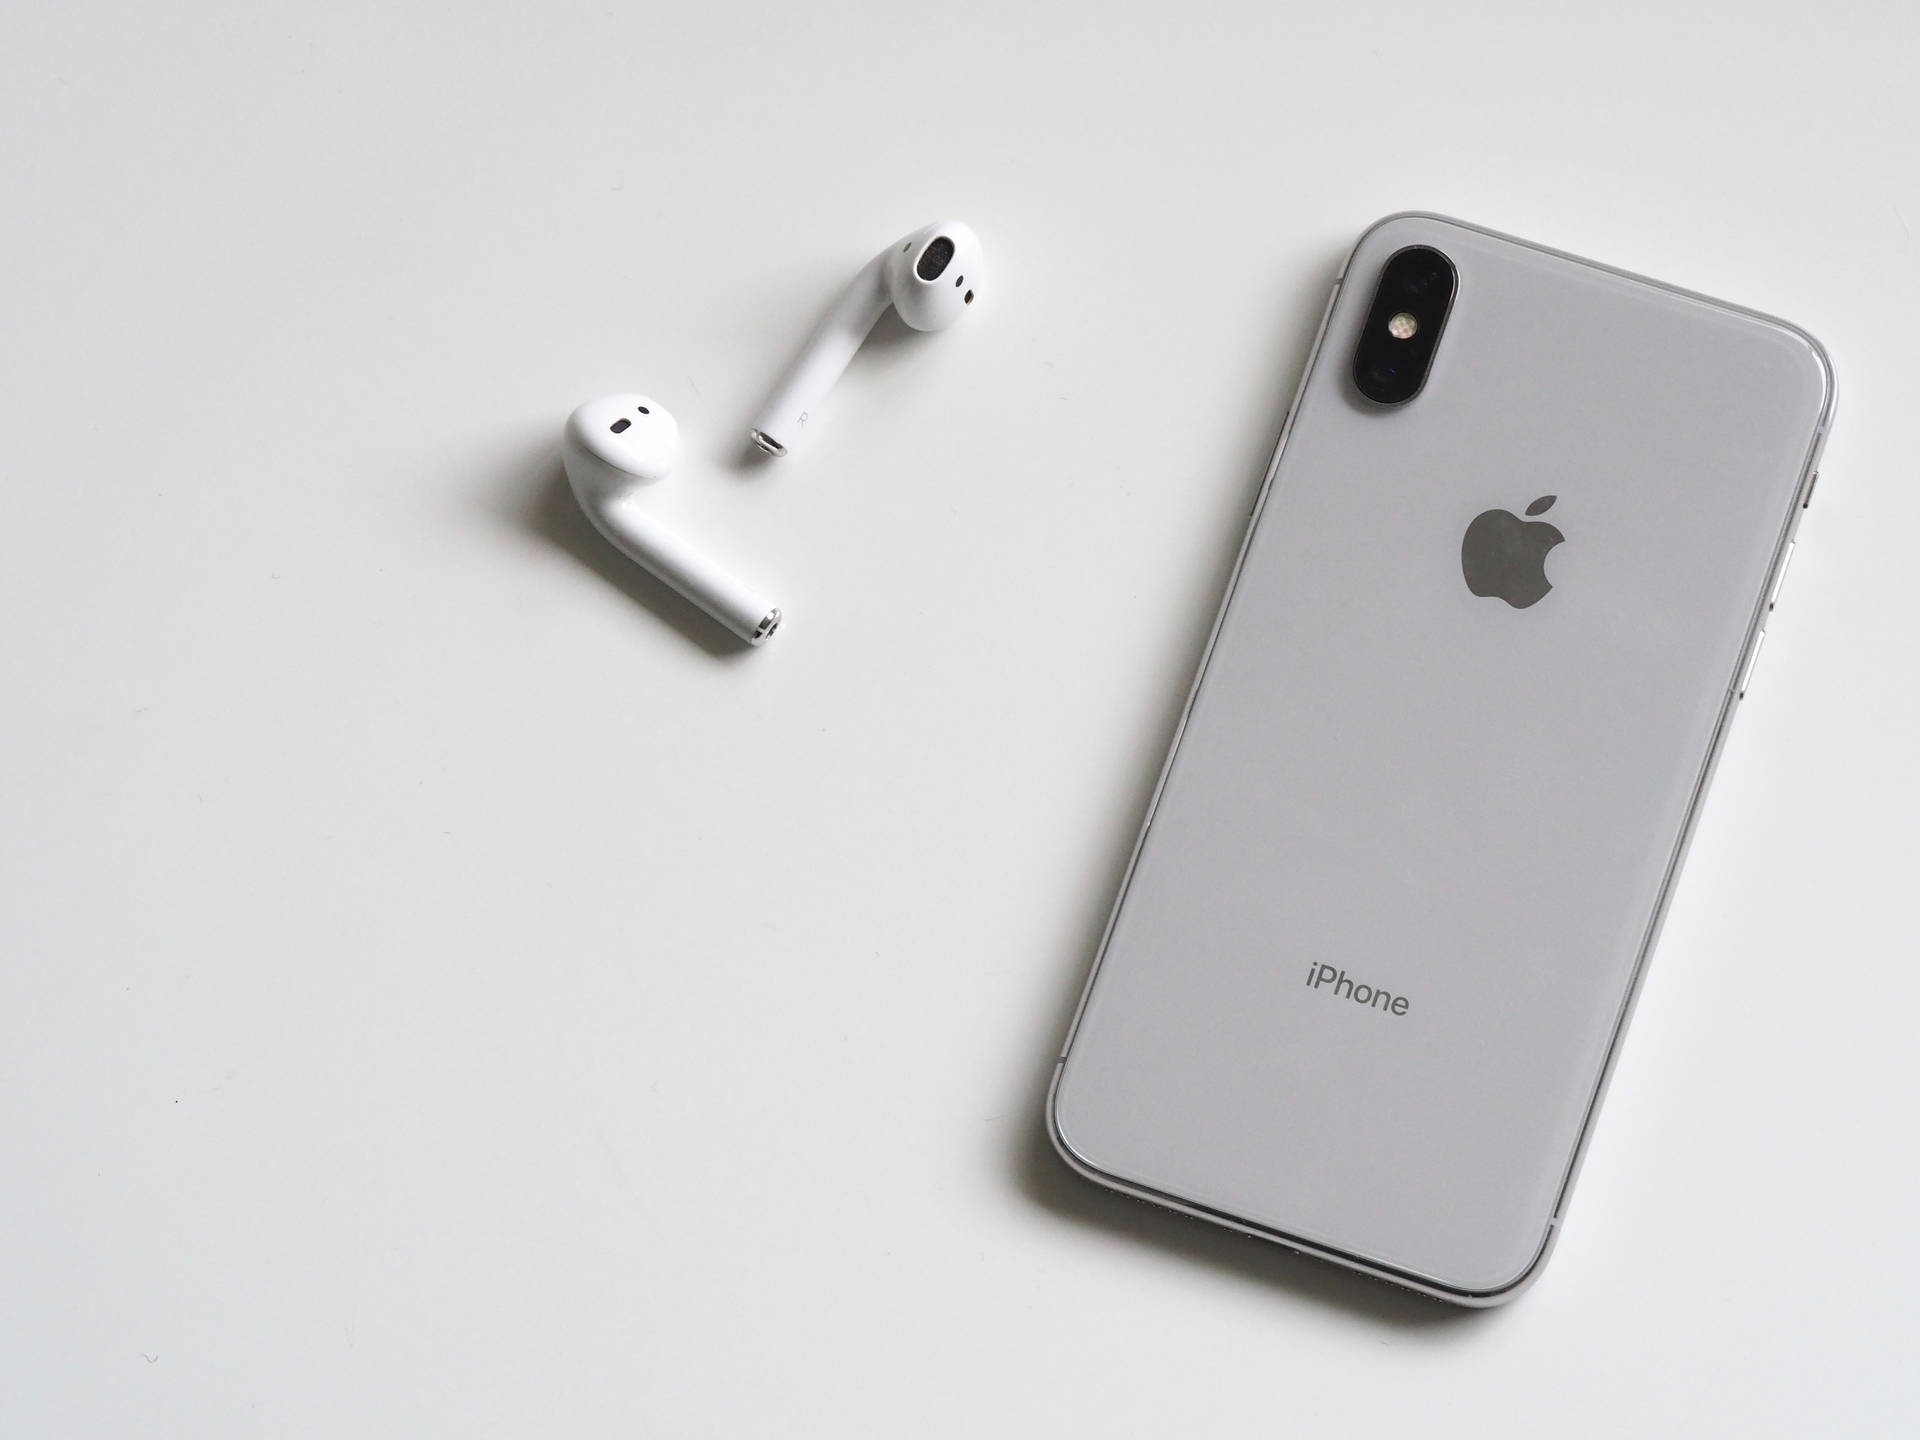 Cool Iphone Air Pods Background